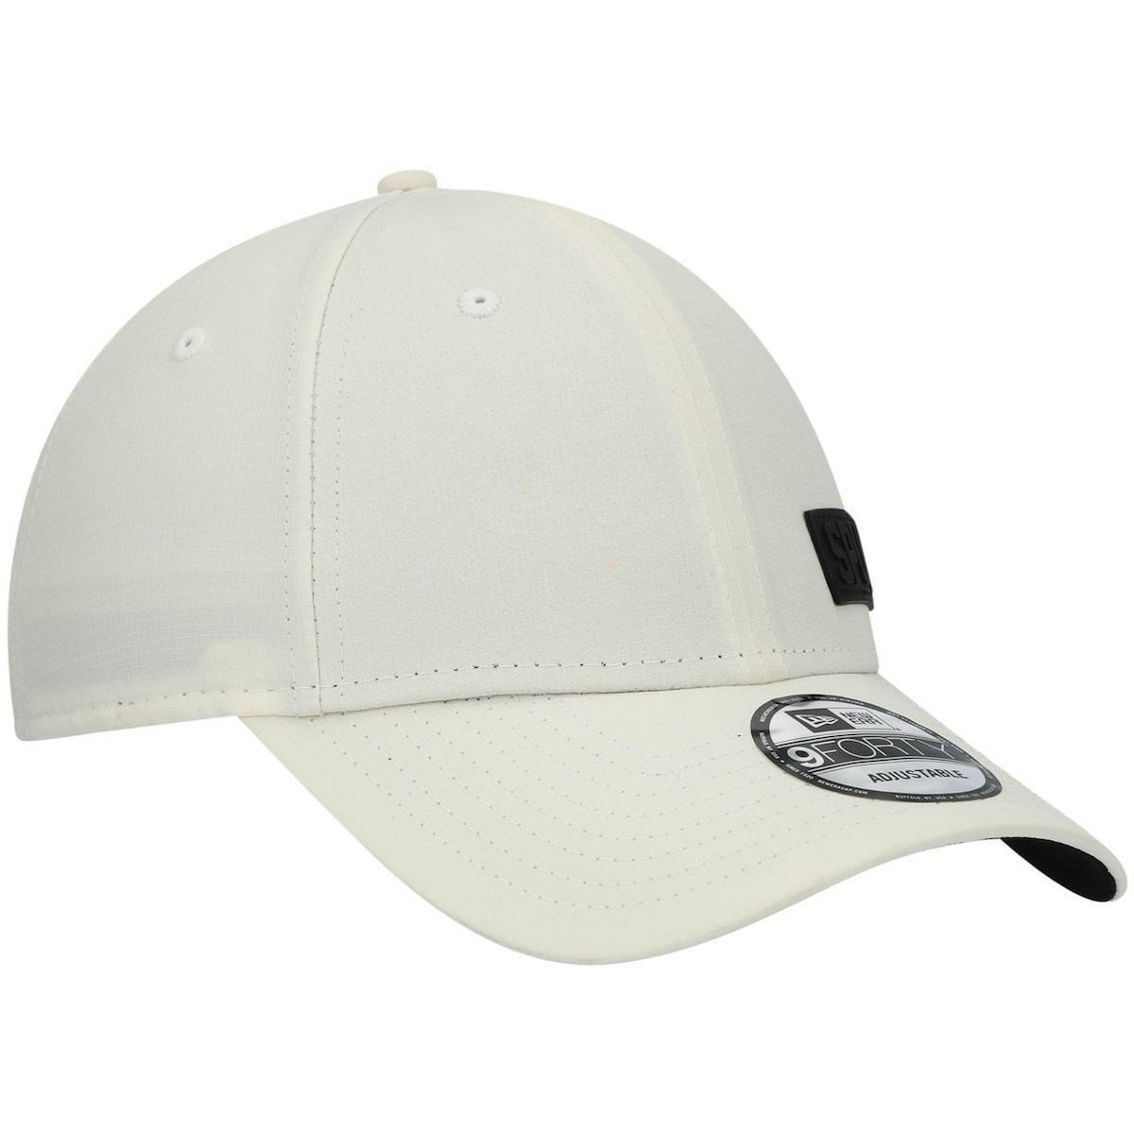 New Era Men's White Tottenham Hotspur Ripstop Flawless 9FORTY Adjustable Hat - Image 4 of 4